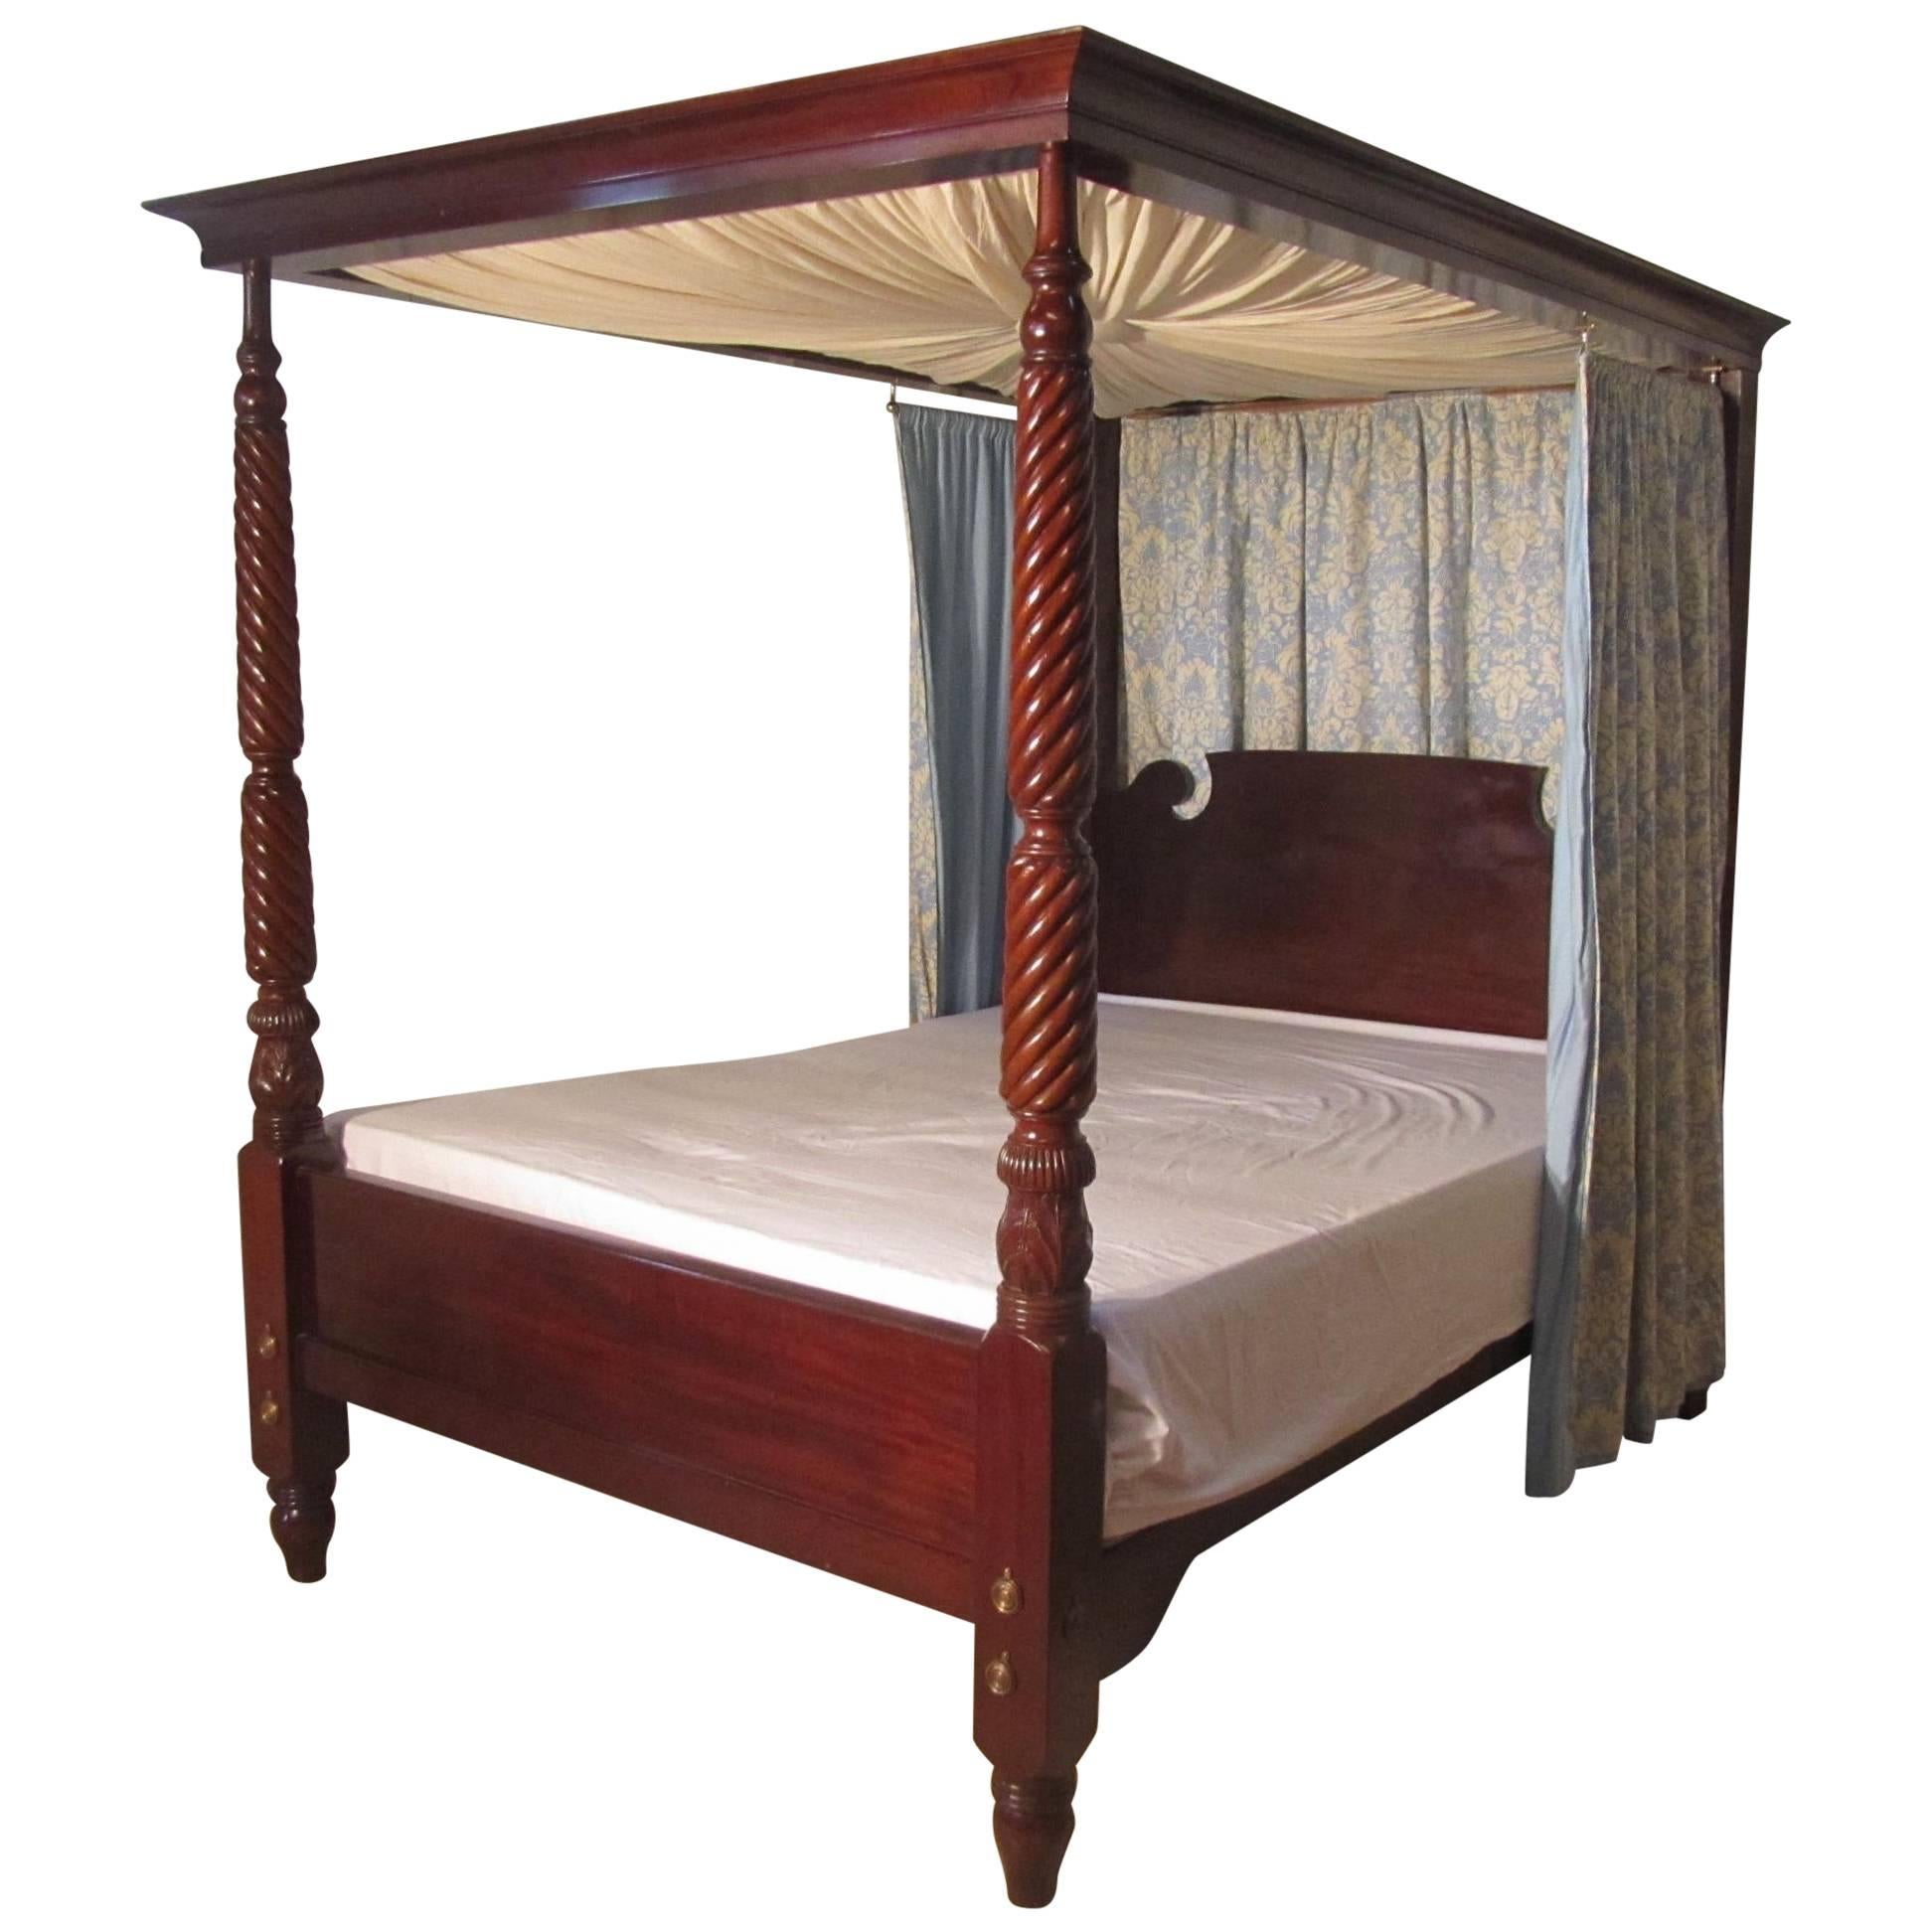 Victorian Mahogany Four-Poster Bed, Large Size with Sunburst Canopy